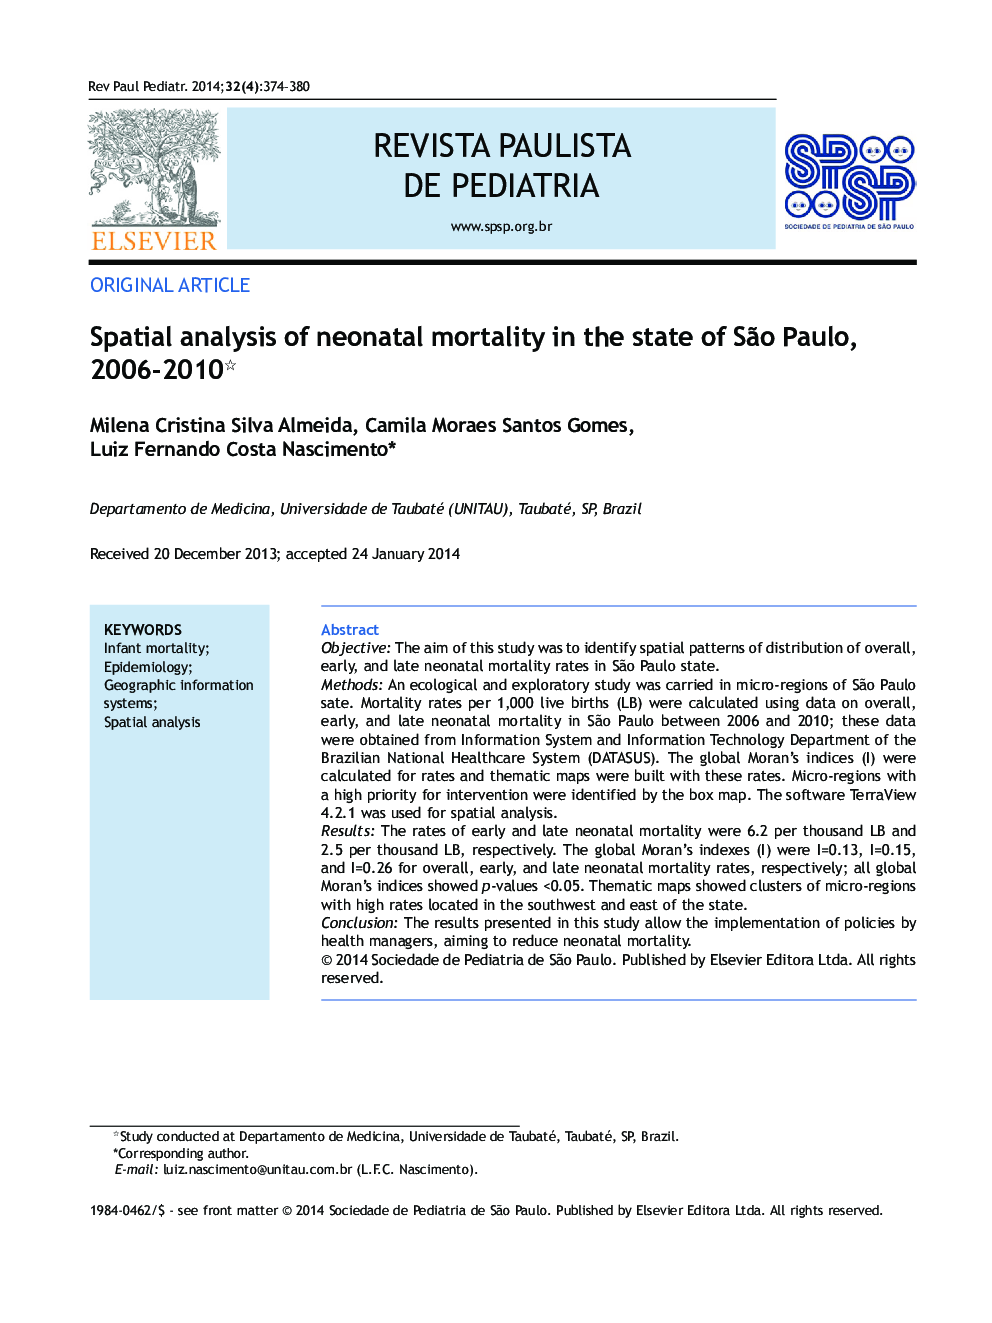 Spatial analysis of neonatal mortality in the state of São Paulo, 2006–2010*